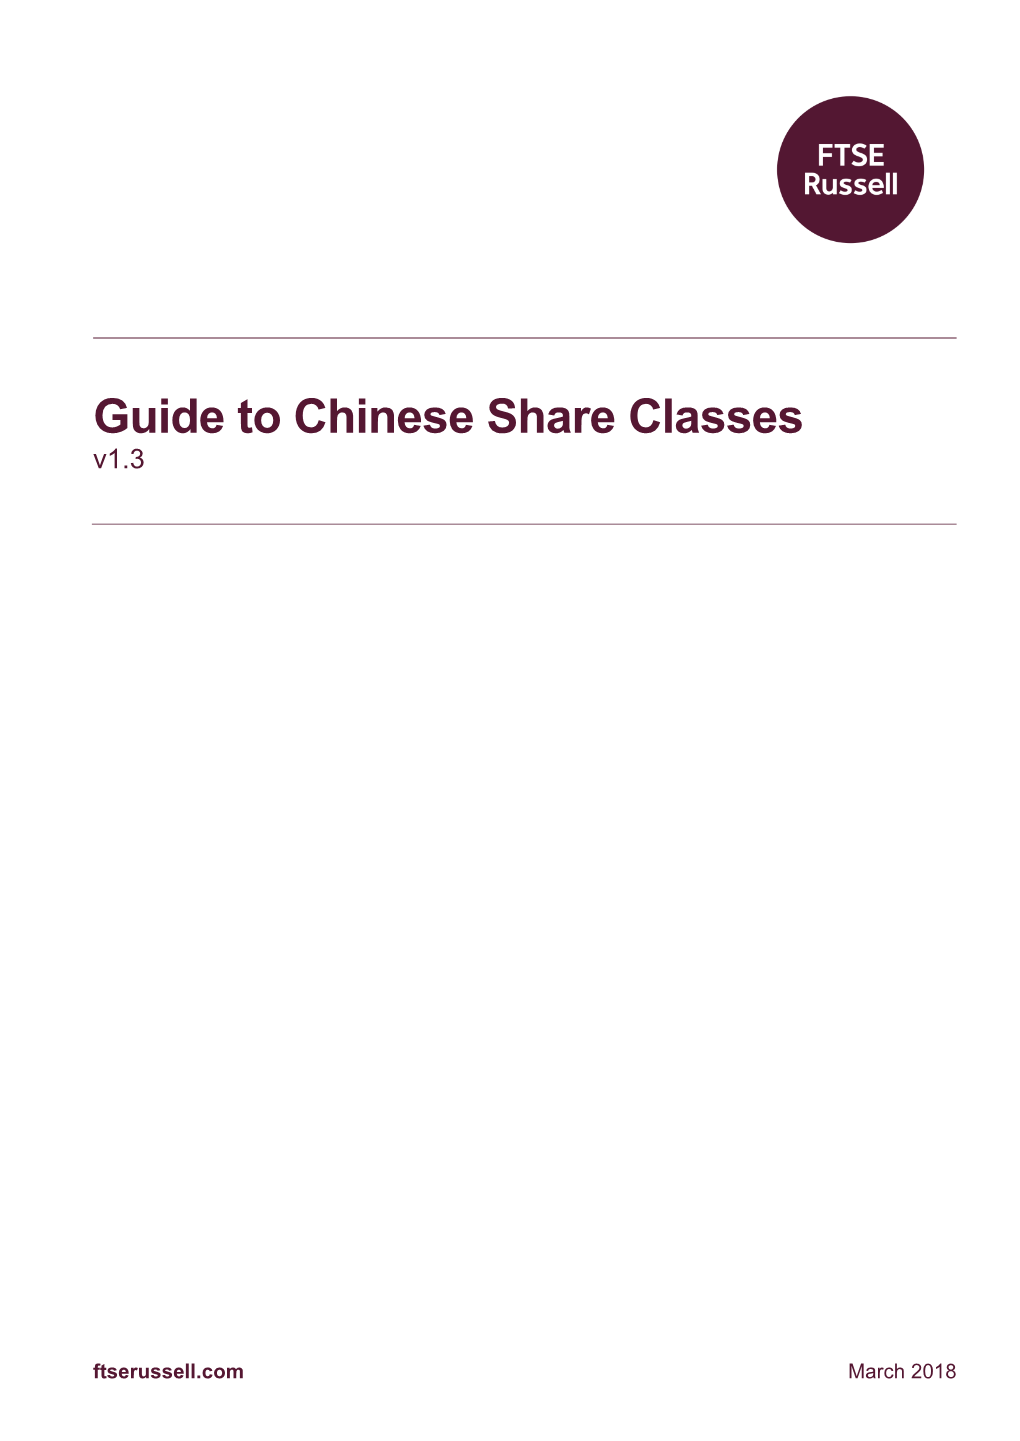 Guide to Chinese Share Classes V1.3